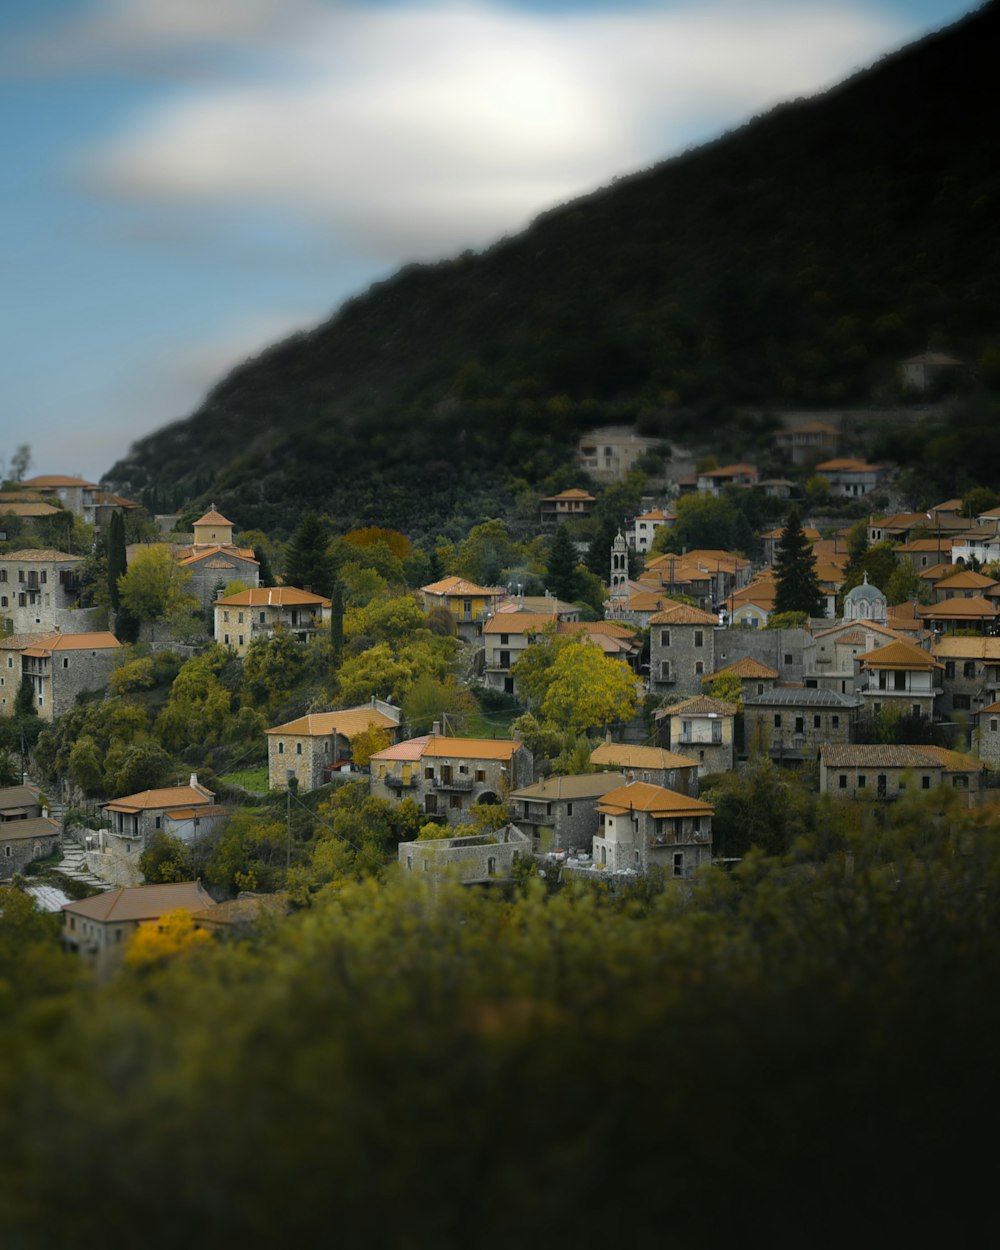 a small village nestled on a mountain side